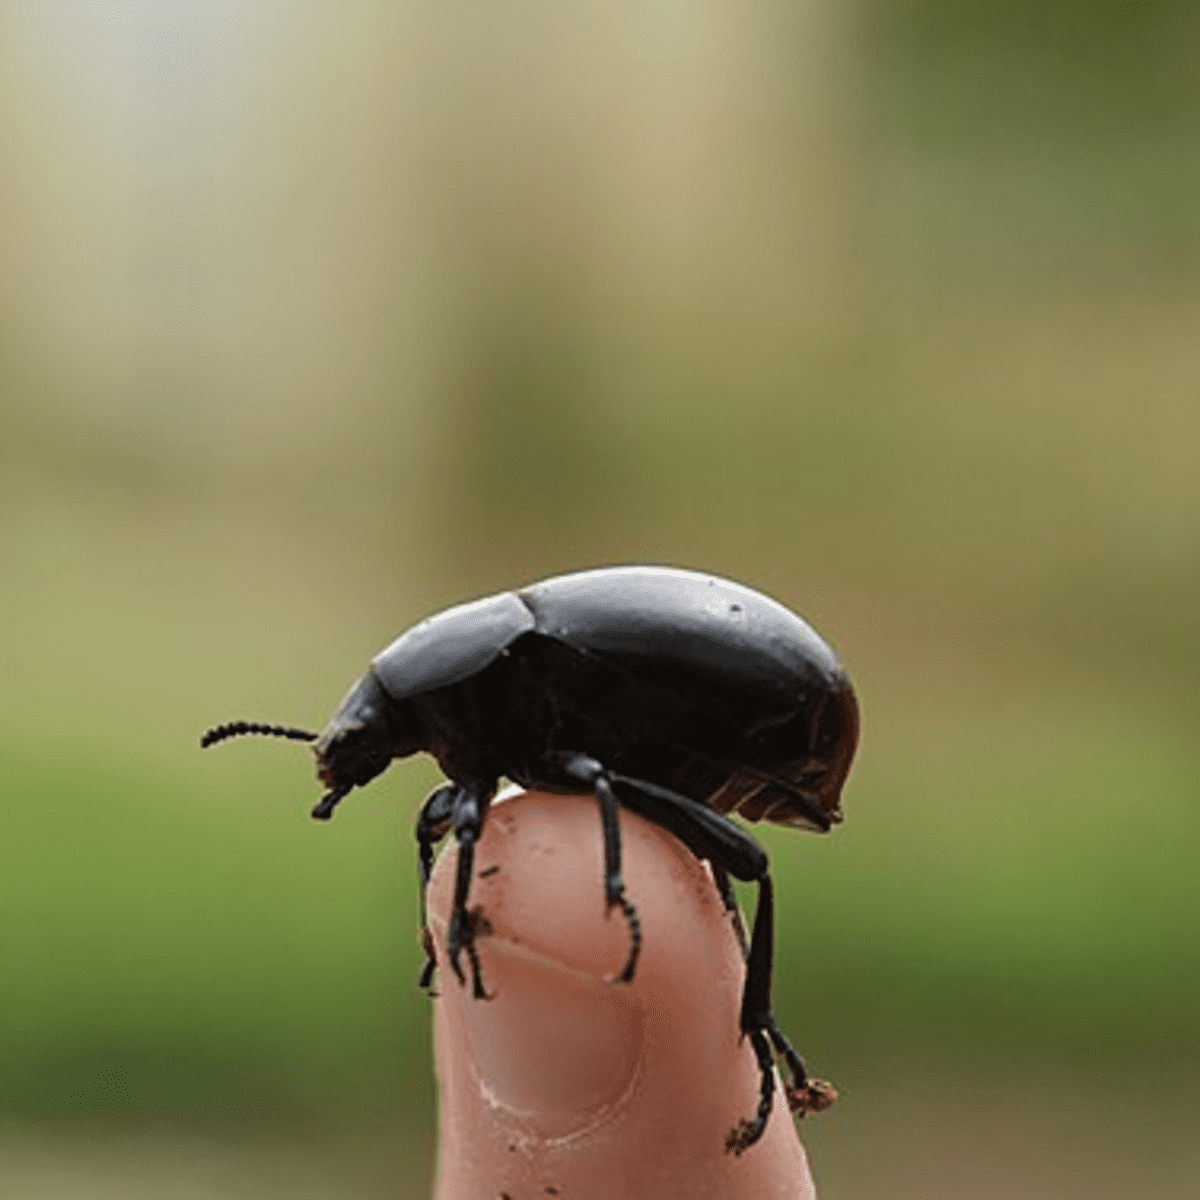 A beetle perched on a finger